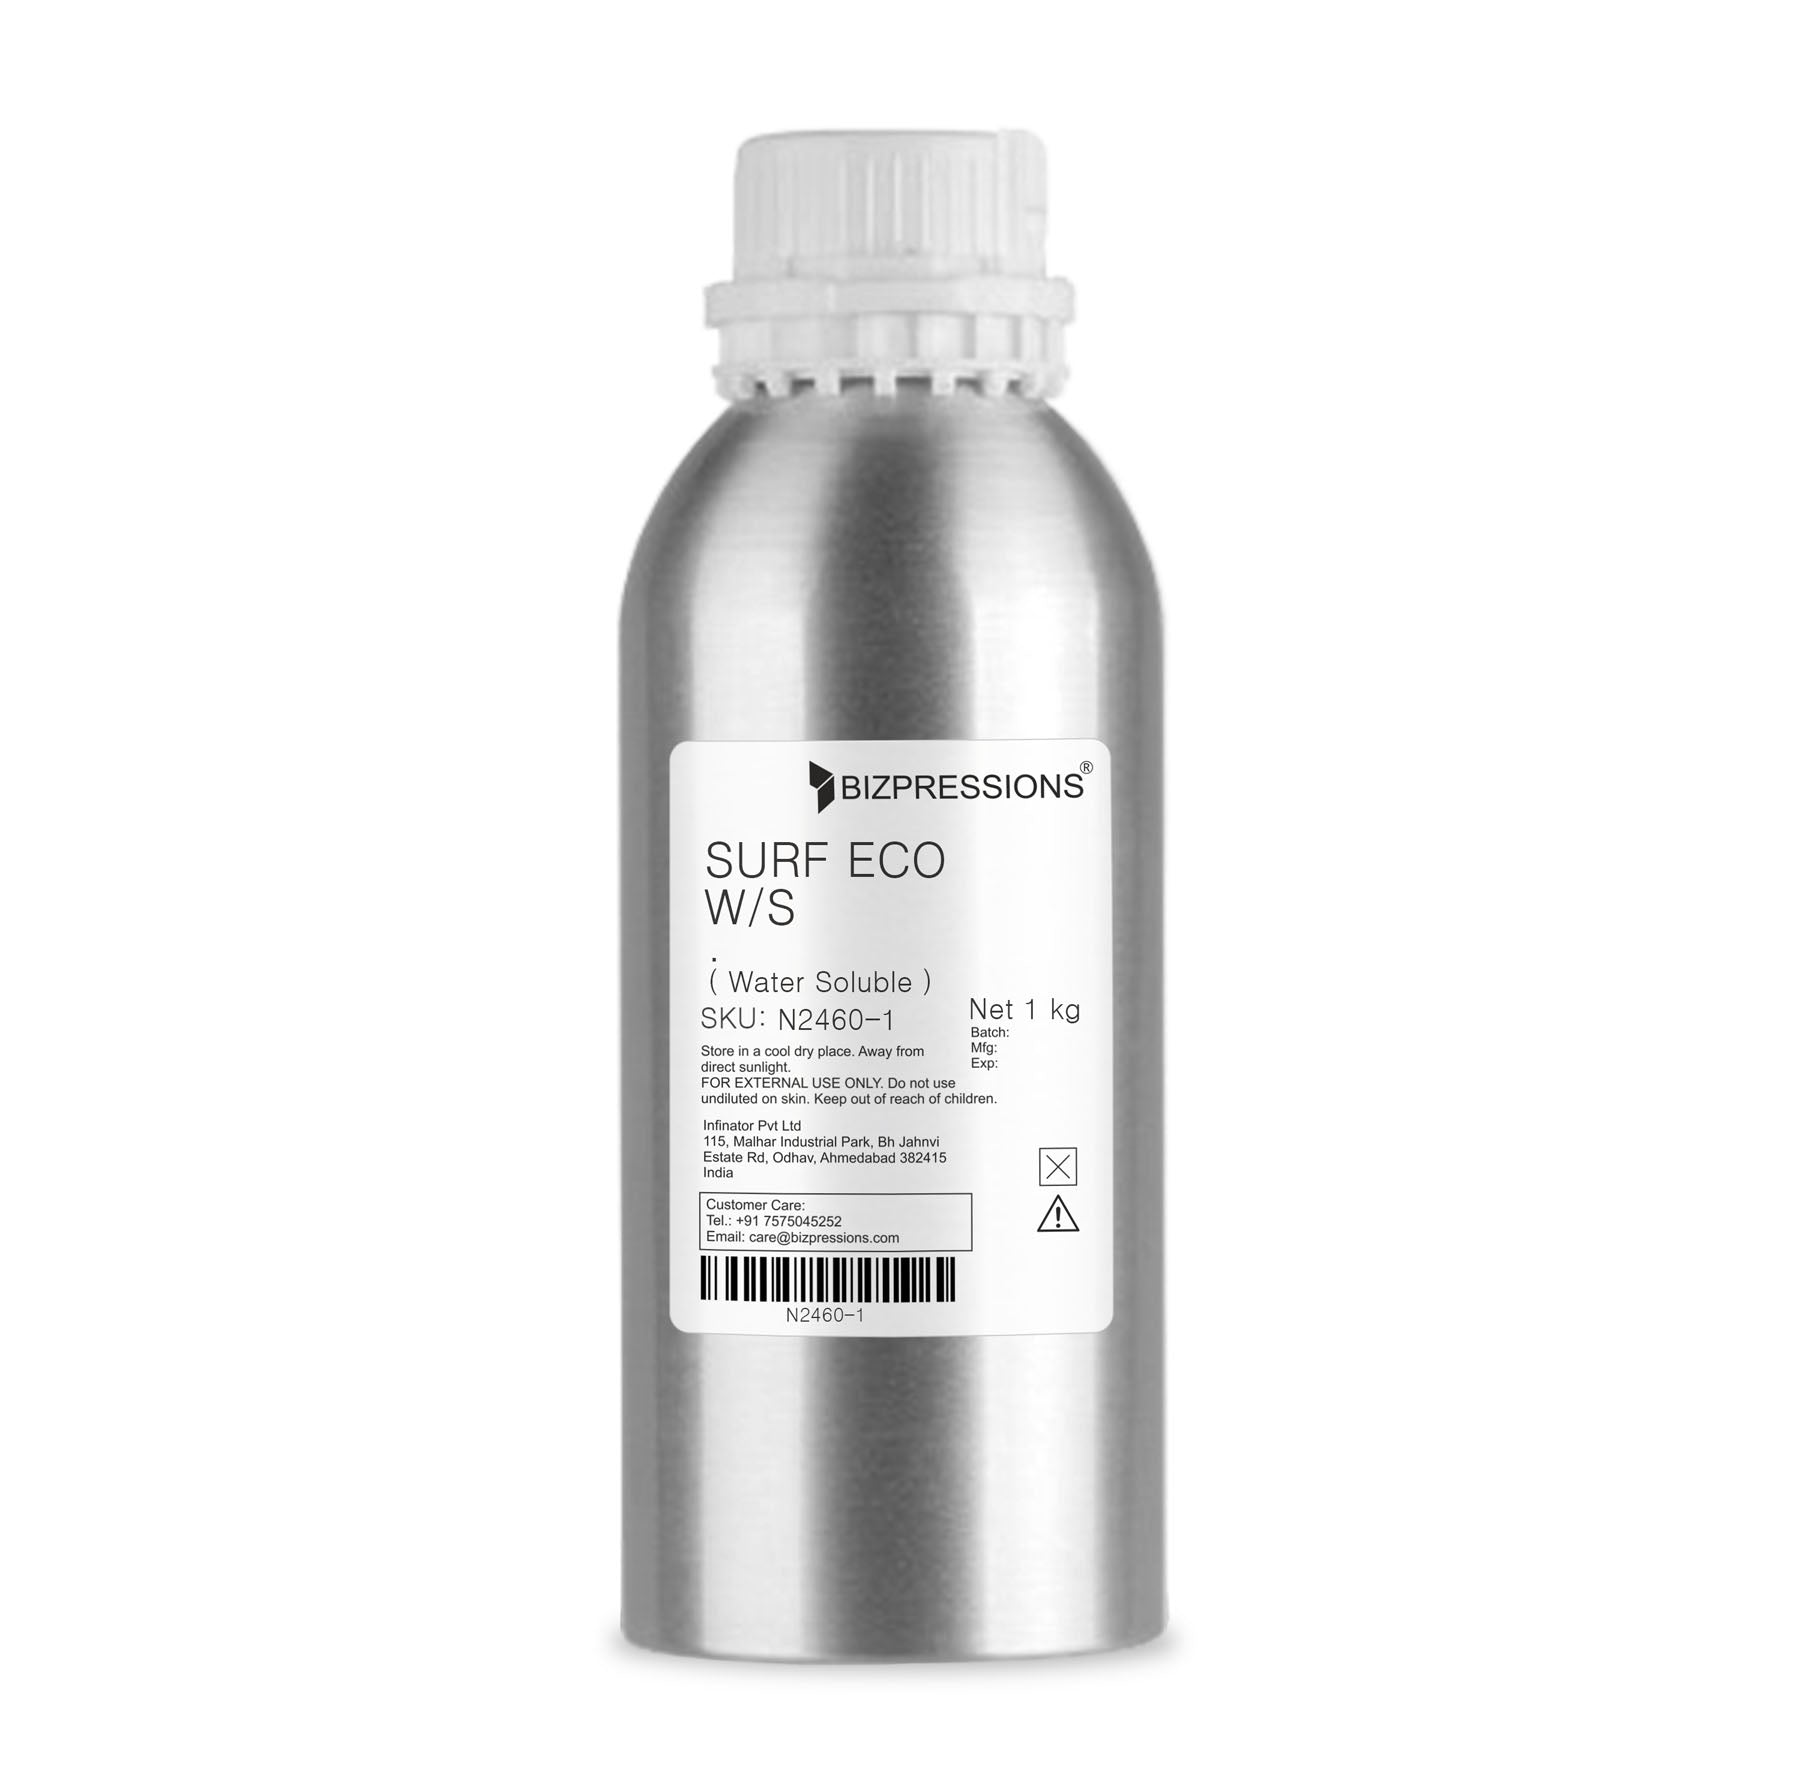 SURF ECO W/S - Fragrance ( Water Soluble ) - 1 kg